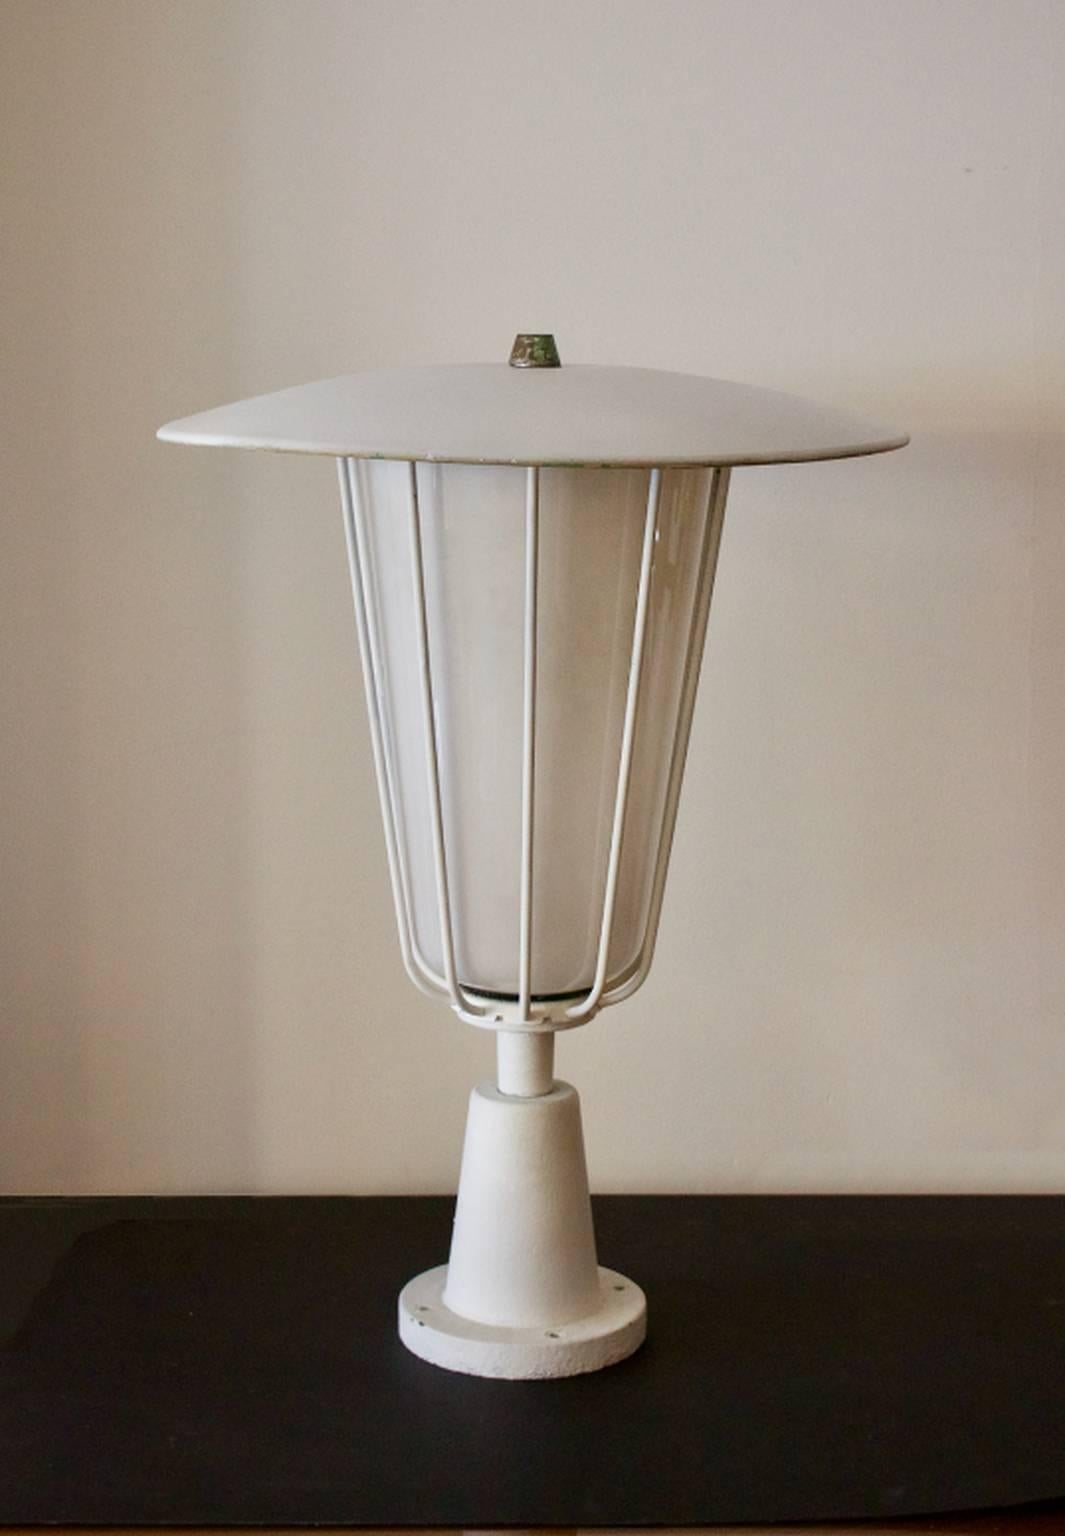 A large garden lantern with white opaline glass shade and metal frame. Manufactured by Bega, Germany, 1950s.

A striking piece in good overall condition. The metal frame shows signs of wear in line with age: the surface has been overpainted in the